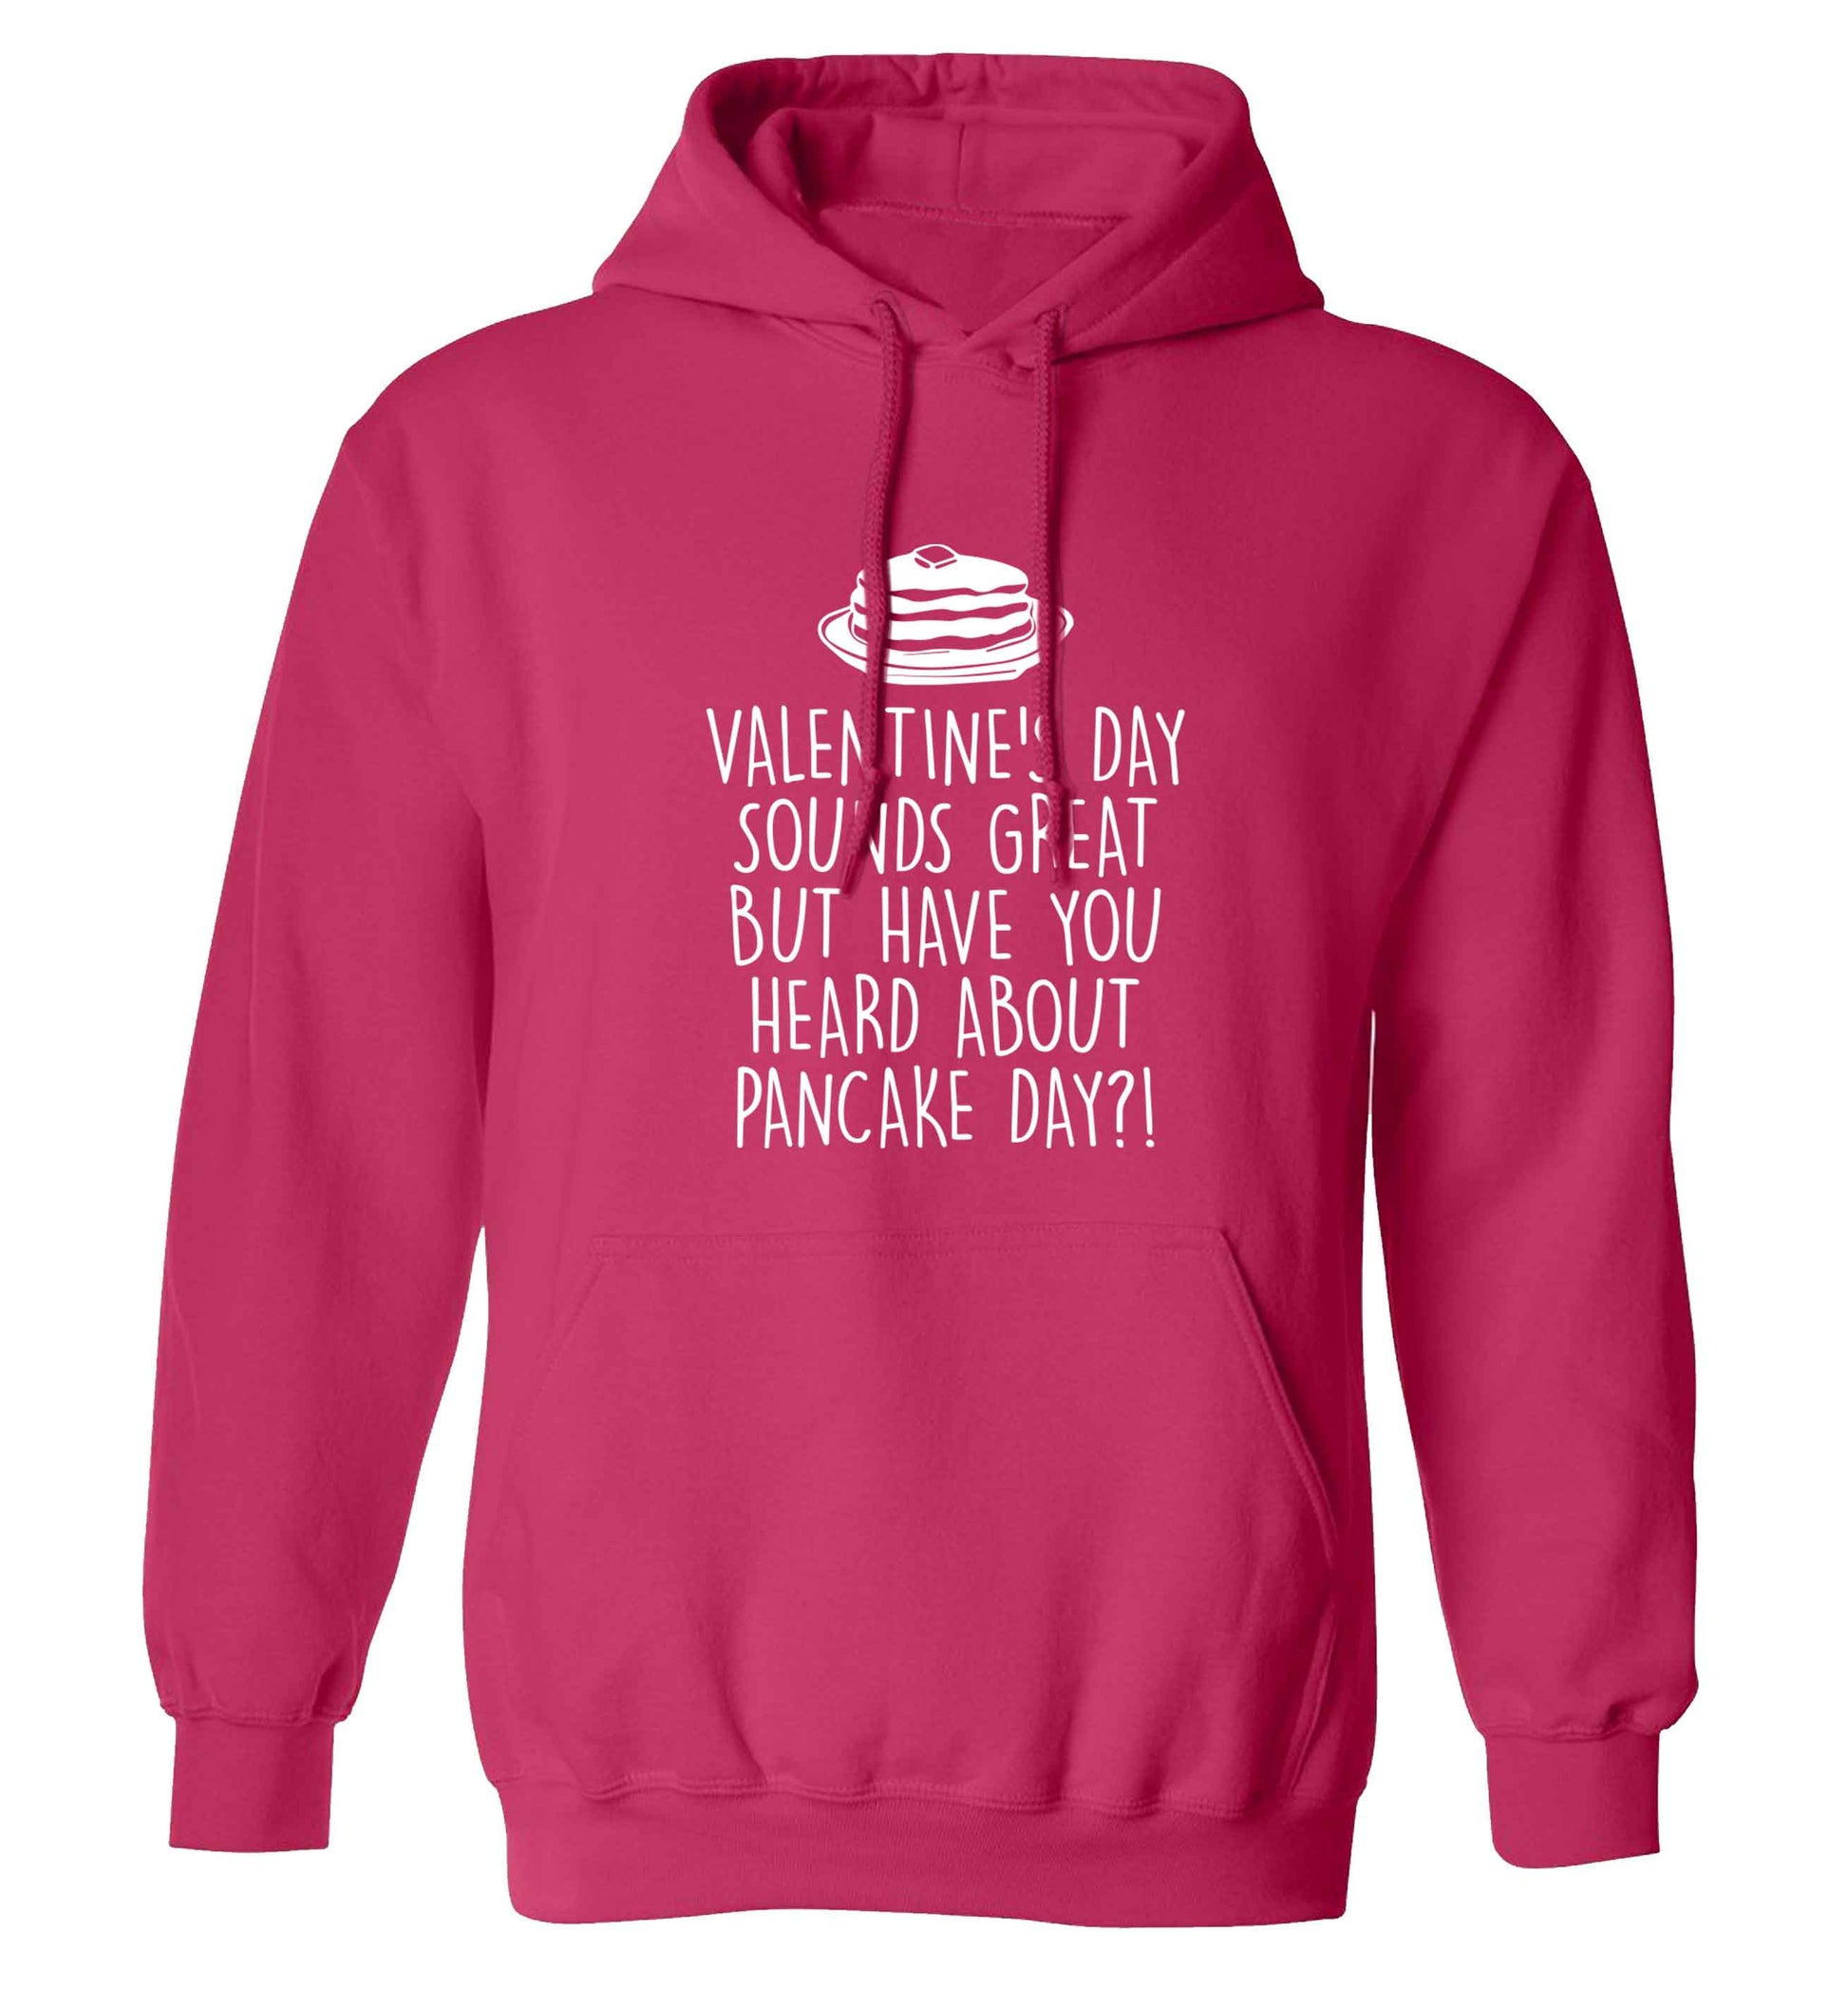 Valentine's day sounds great but have you heard about pancake day?! adults unisex pink hoodie 2XL